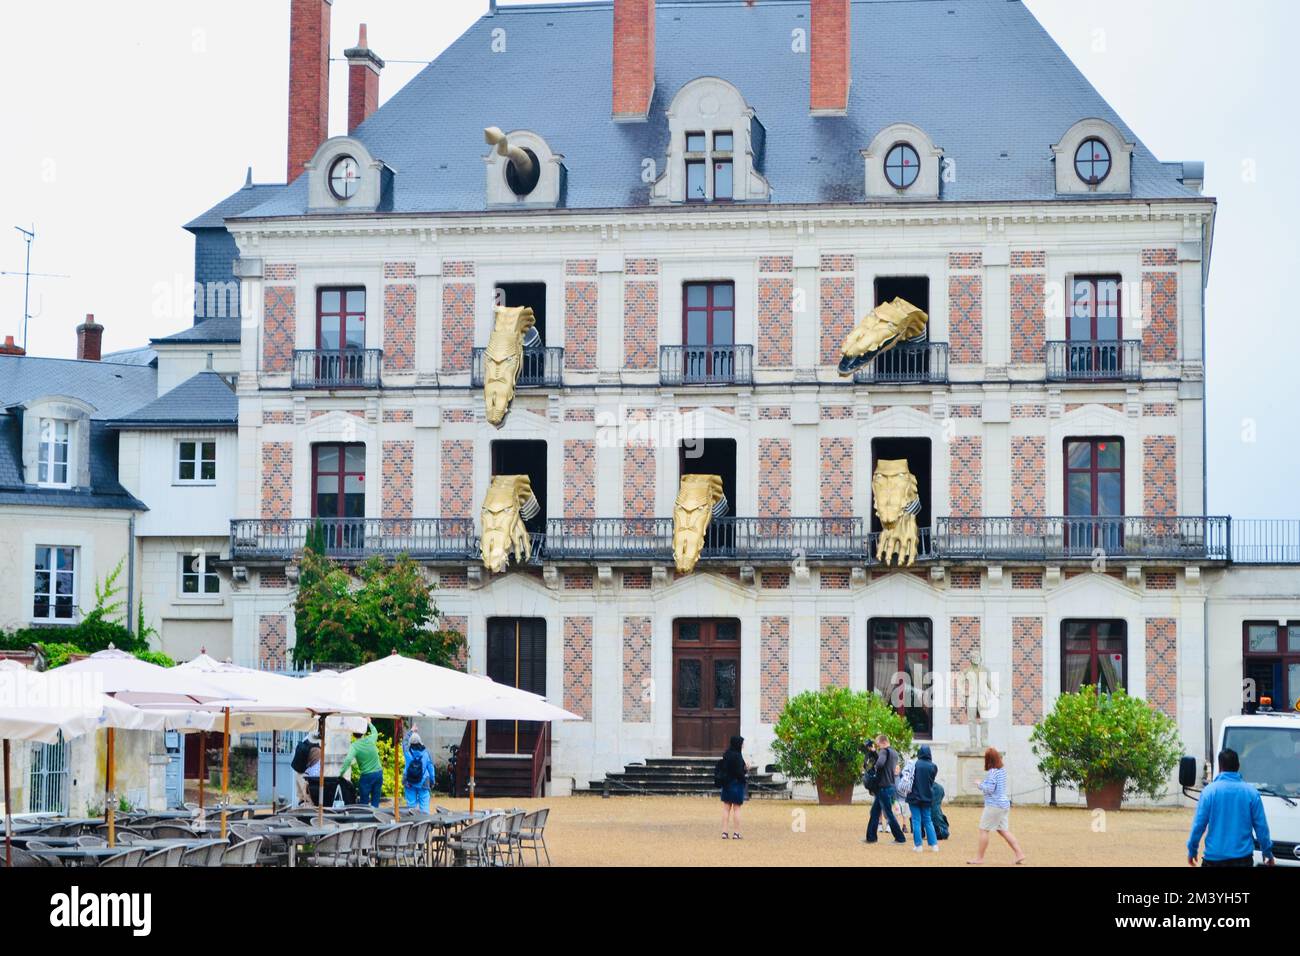 tourists visit the famous dragon building in Blois France. Stock Photo